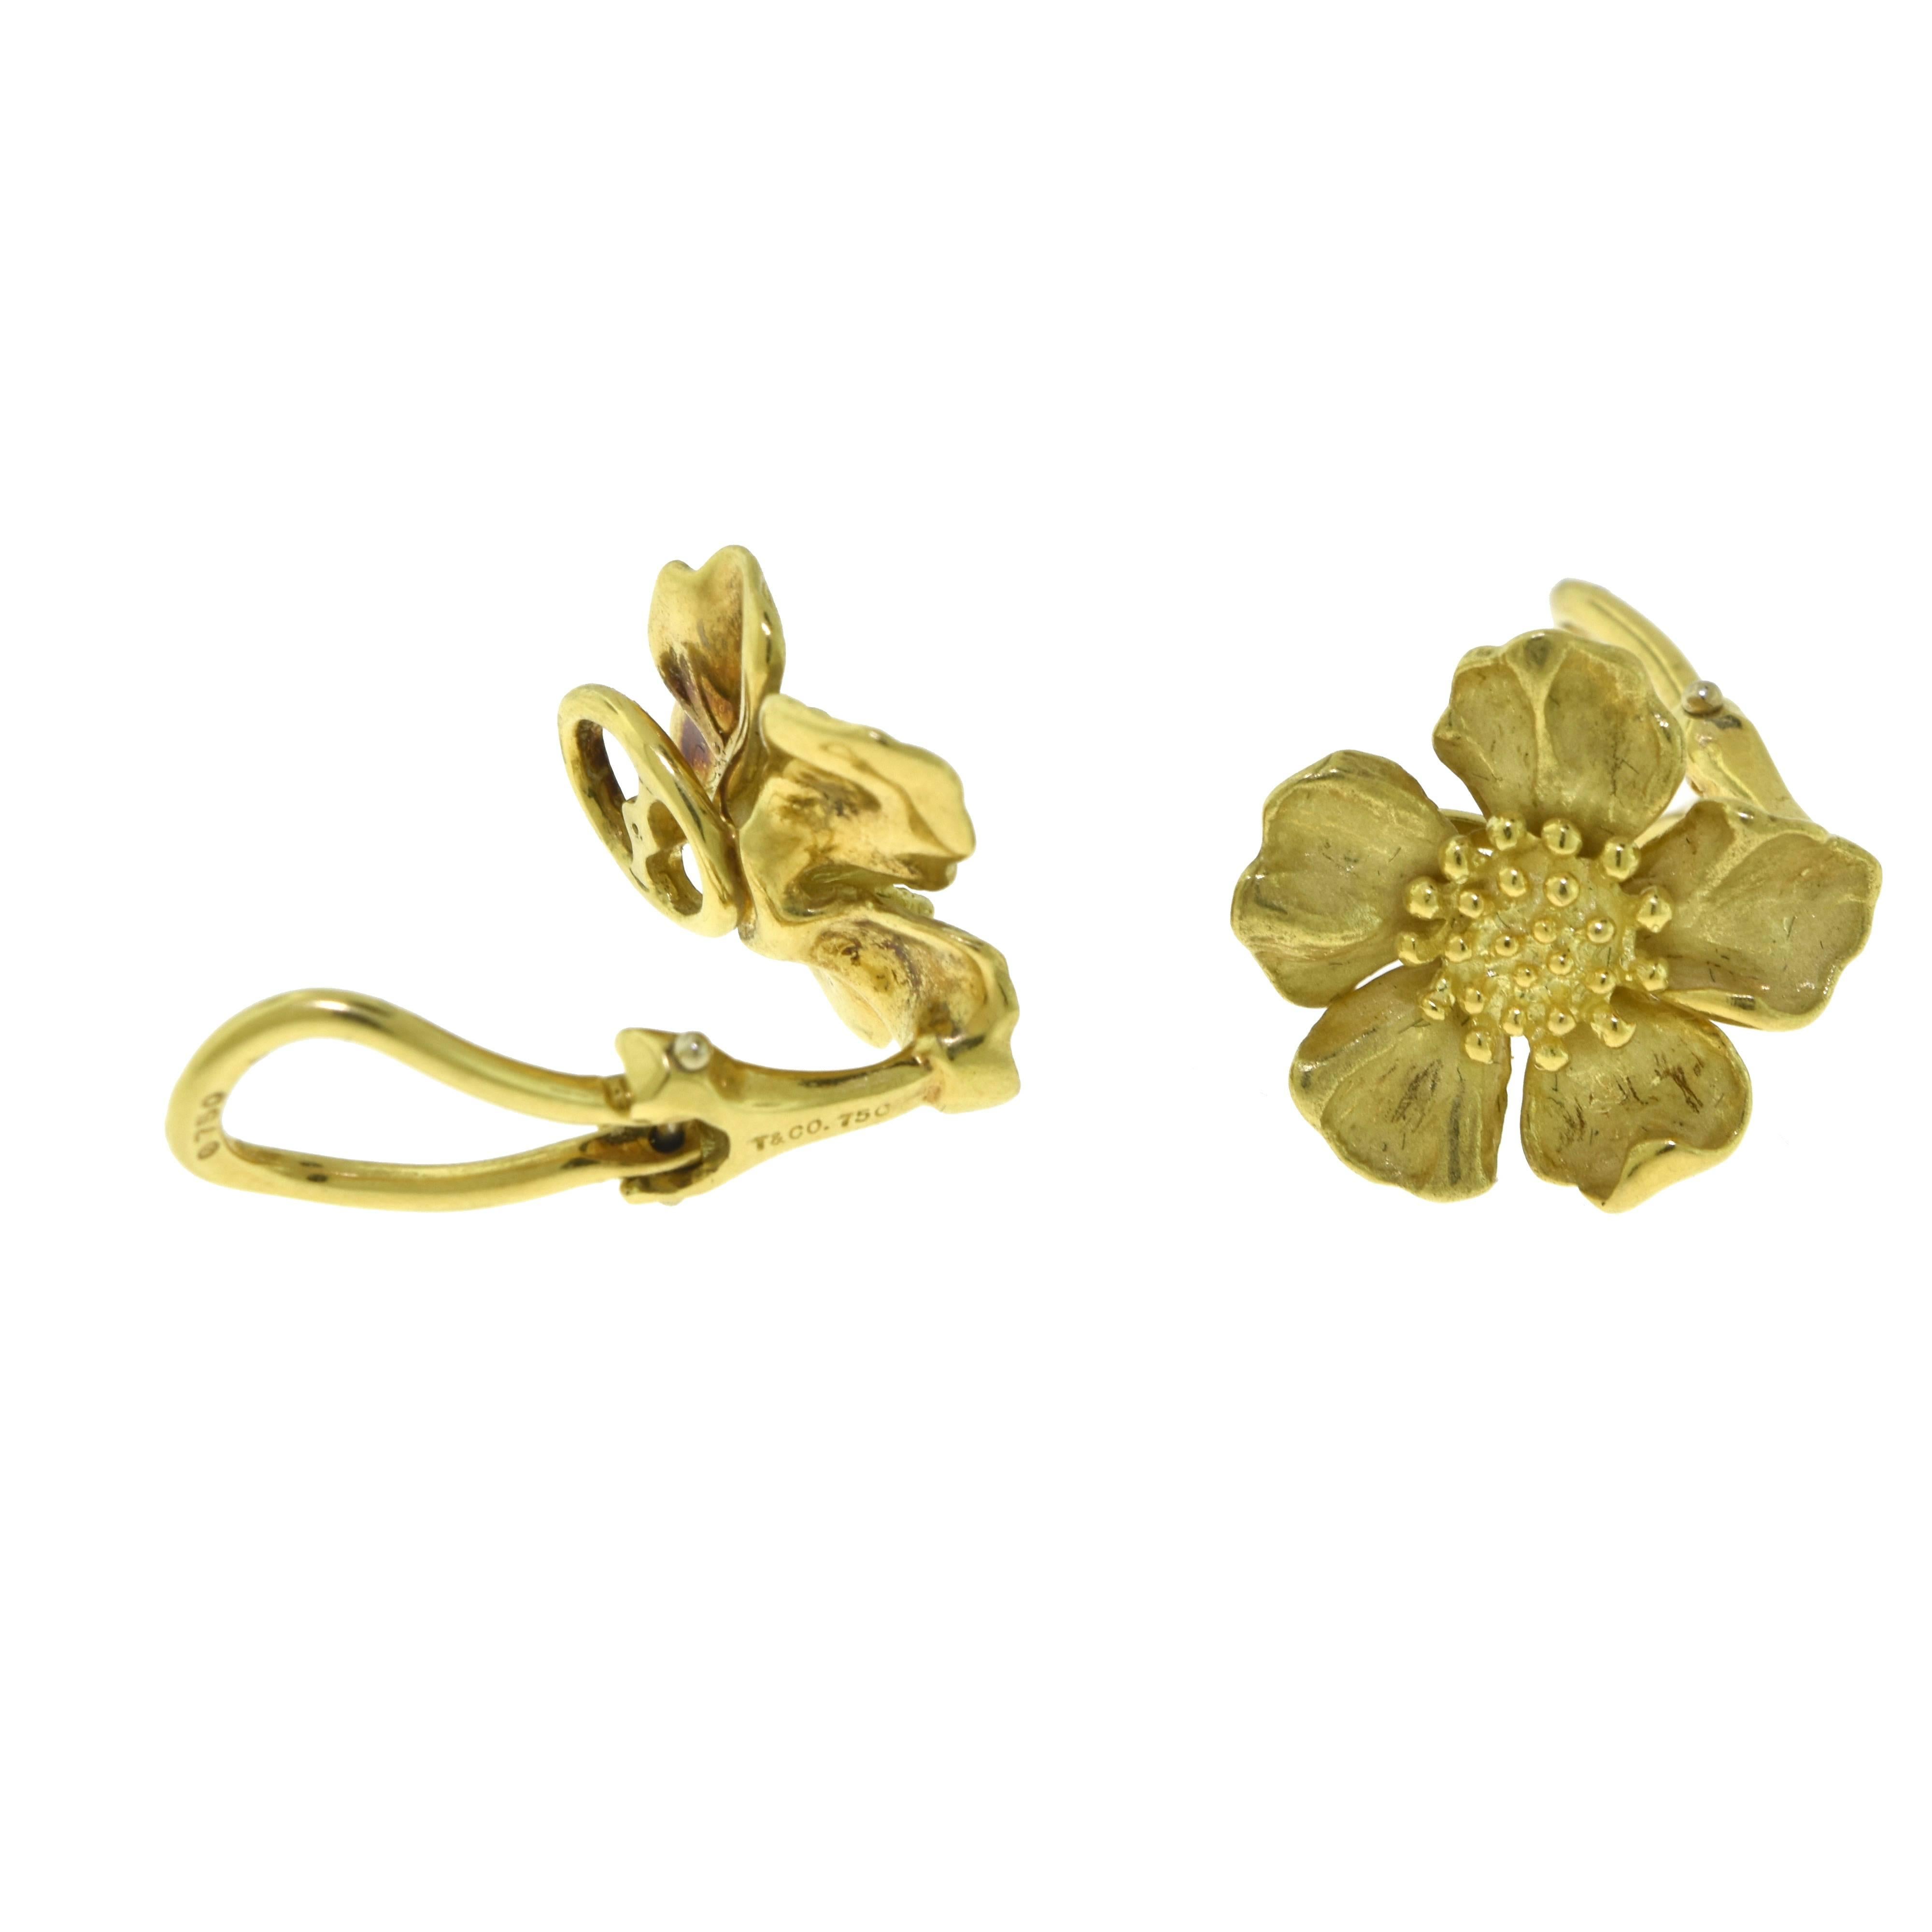 Designer: Tiffany & Co.
Style: Dogwood
Metal: Yellow Gold
Metal Purity: 18k
Total Item Weight (g): 8.7
Flower Dimensions: 15.99 x 14.90 mm
Hallmark: T&Co. 750 
Closure: Clip On 

ABOUT THE ITEM:​​​​​​​​​​​​​​
The Dogwood is not the most popular or